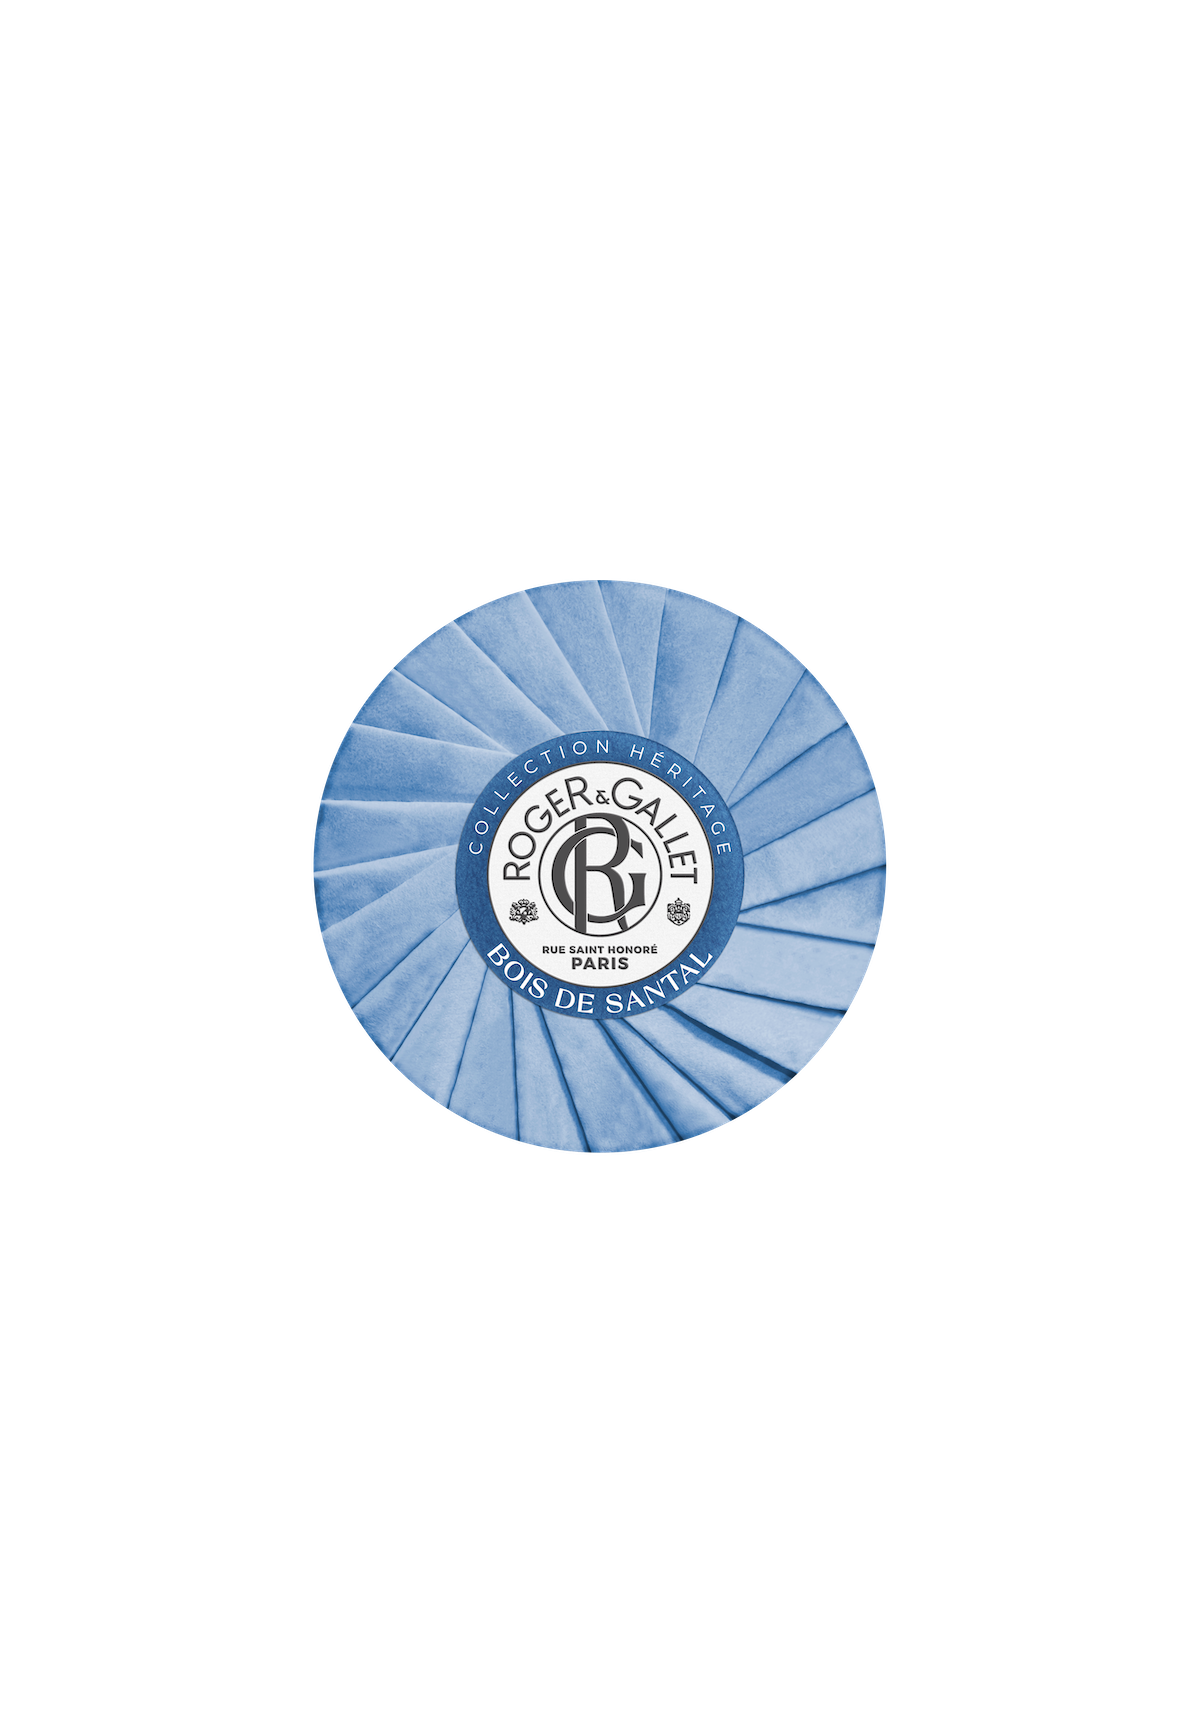 A bar of Roger & Gallet Sandalwood - Wellbeing Soap - 3.5 oz in a blue and white decorative box with a circular, striped pattern and the company's logo in the center.